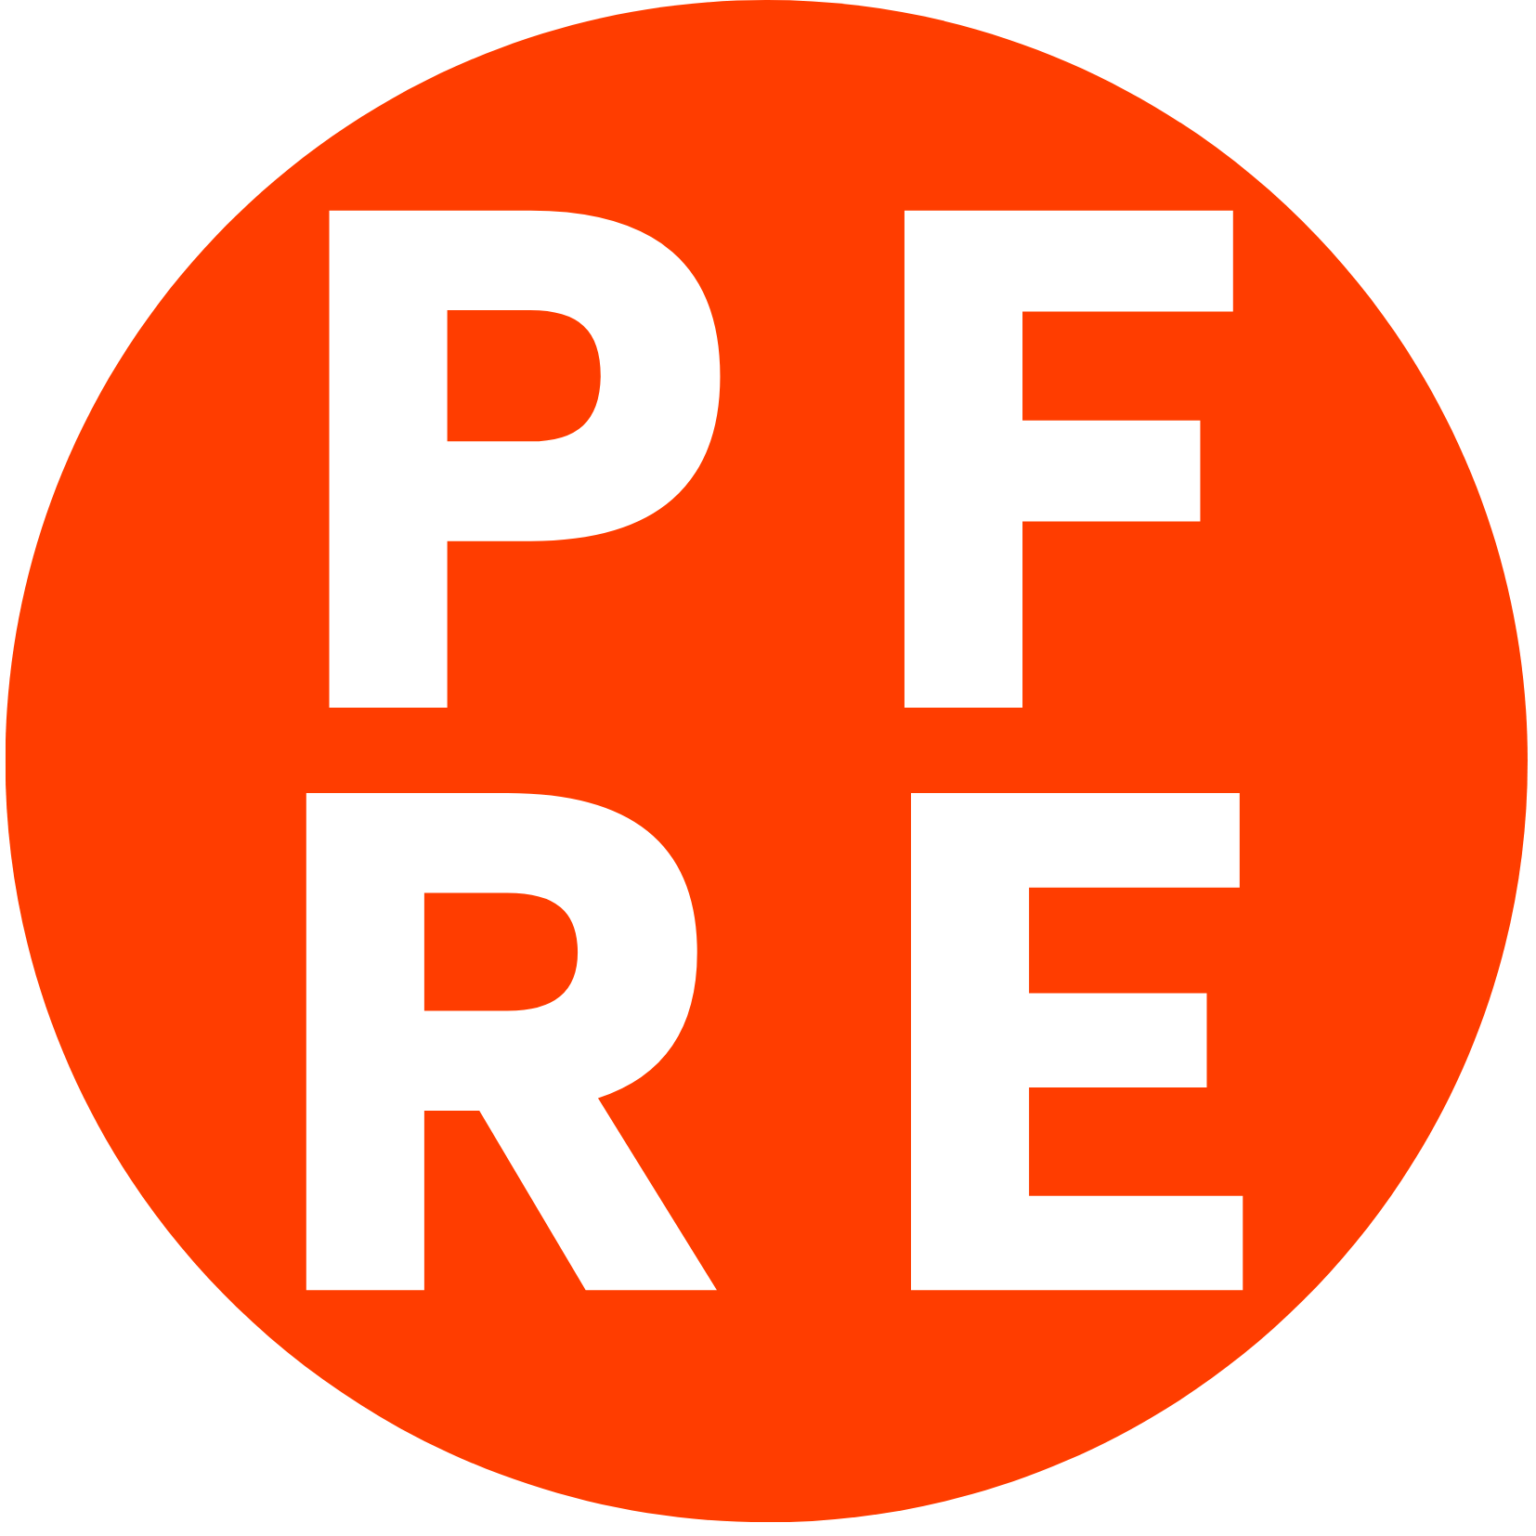 PFRE logo rond